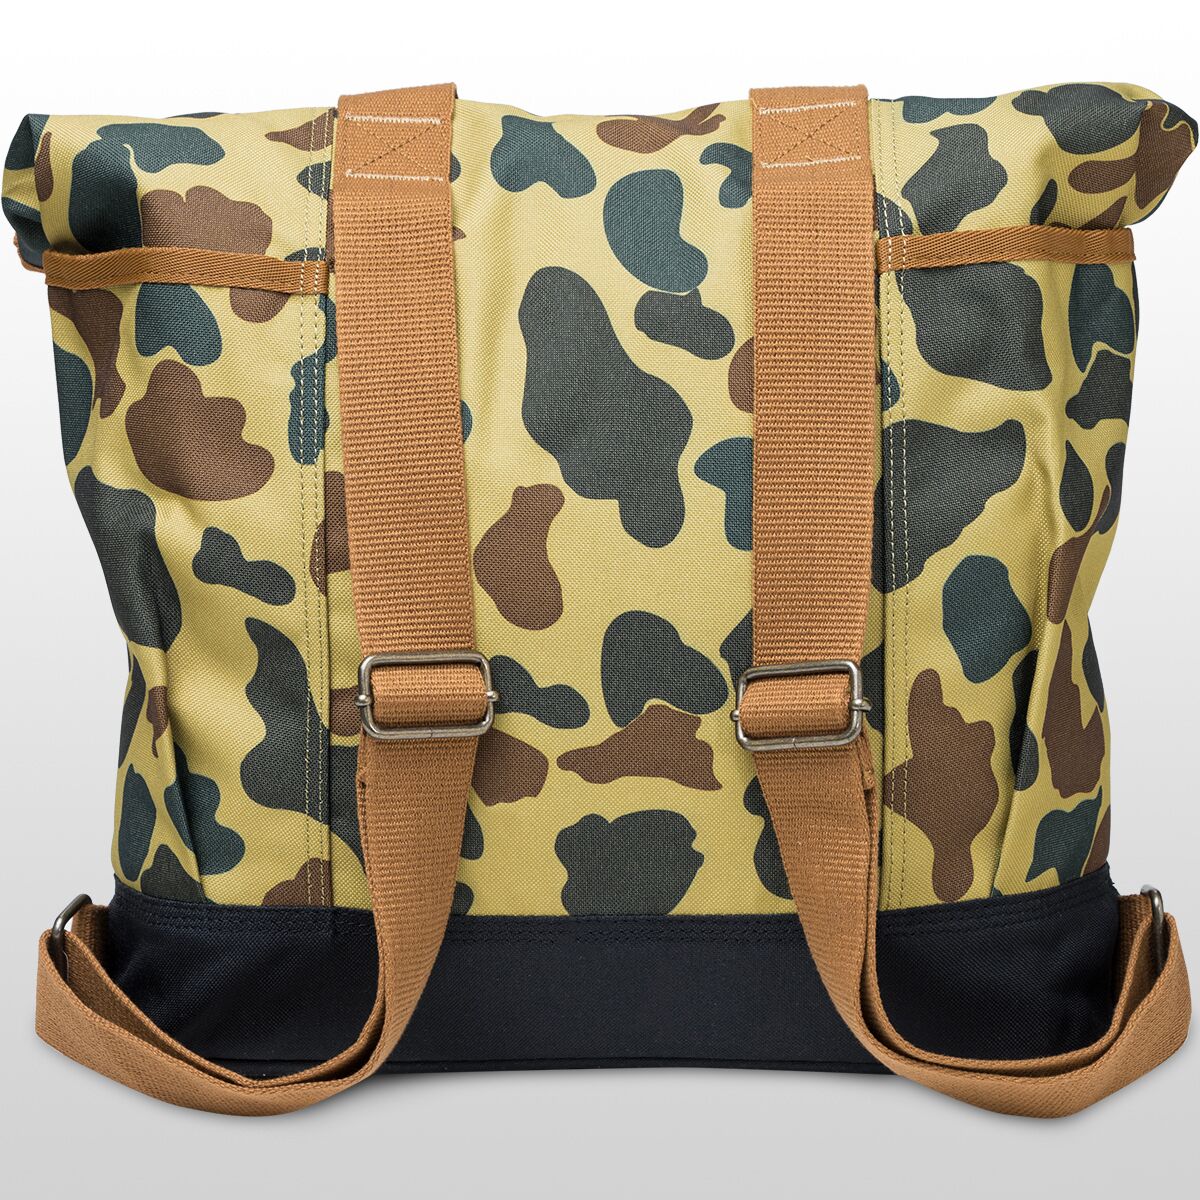 Carhartt Convertible, Durable Tote Bag with Adjustable Backpack Straps and  Laptop Sleeve